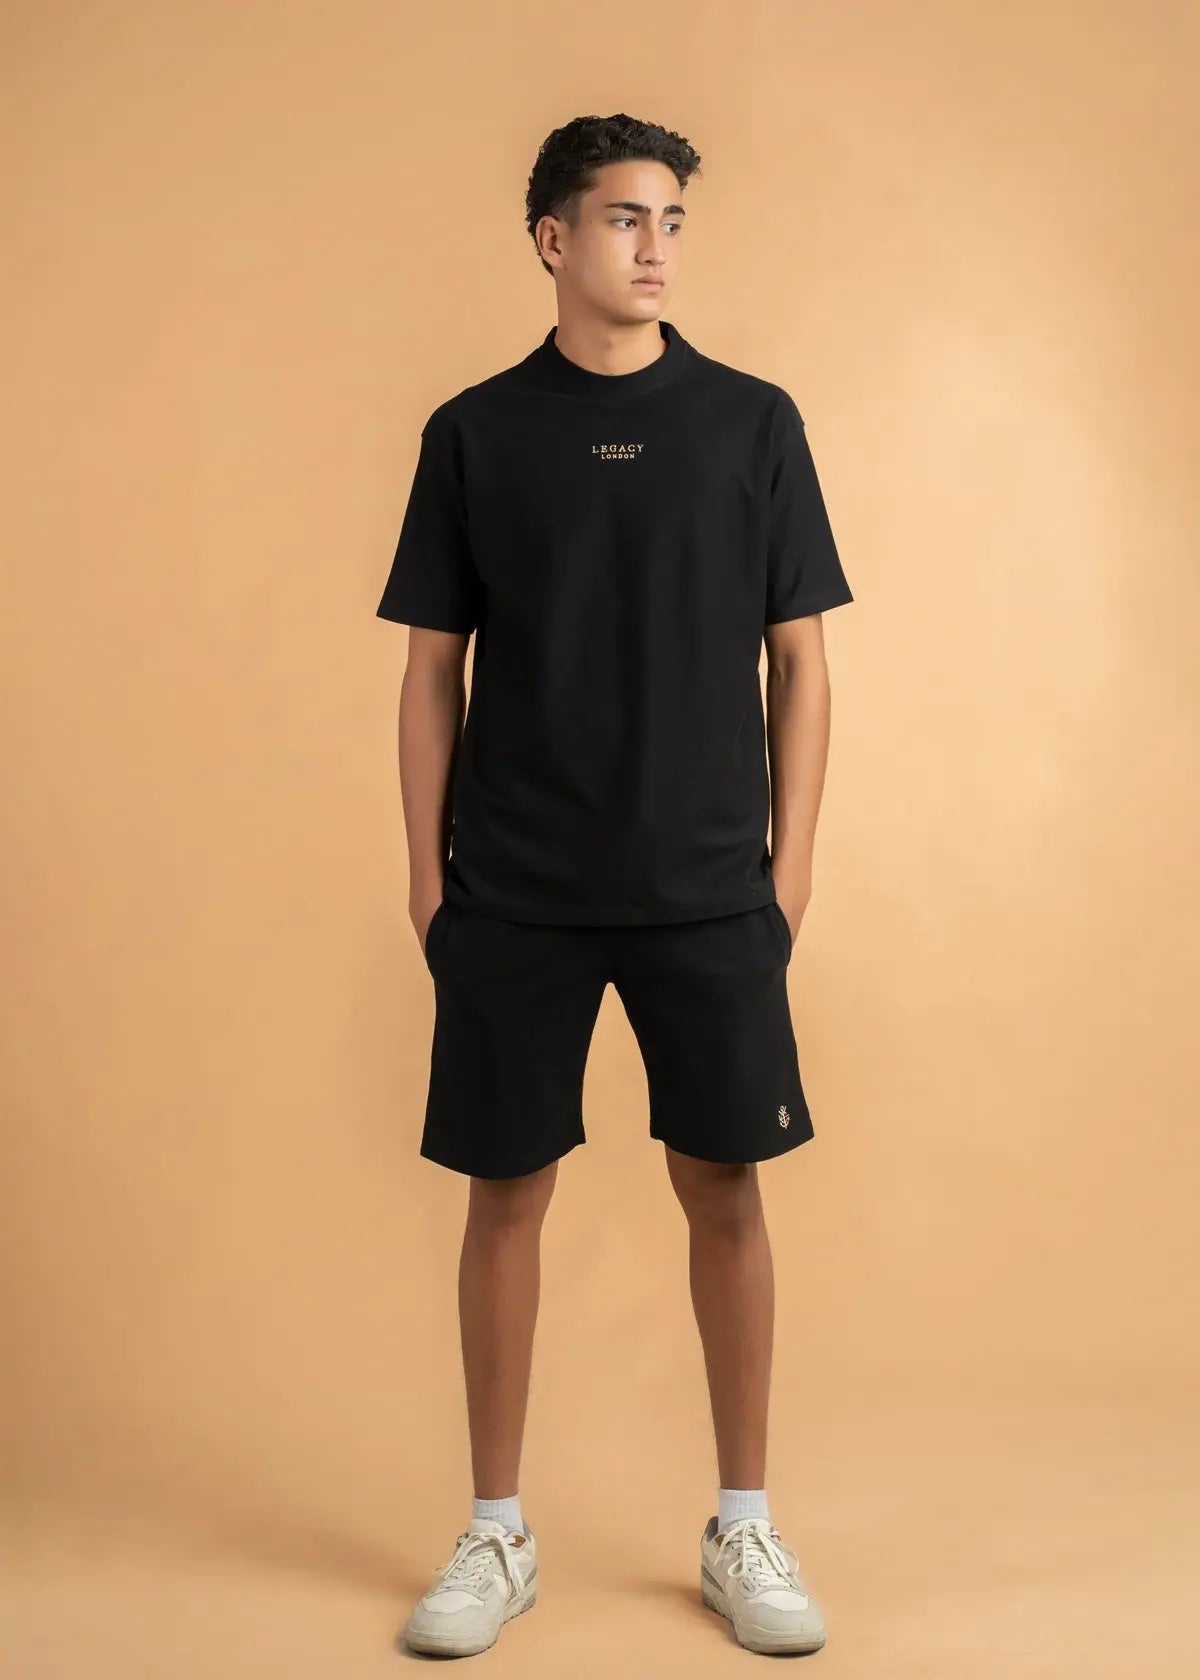 Legacy London Embroiderd Oversize T shirt and Shorts Set LCY London